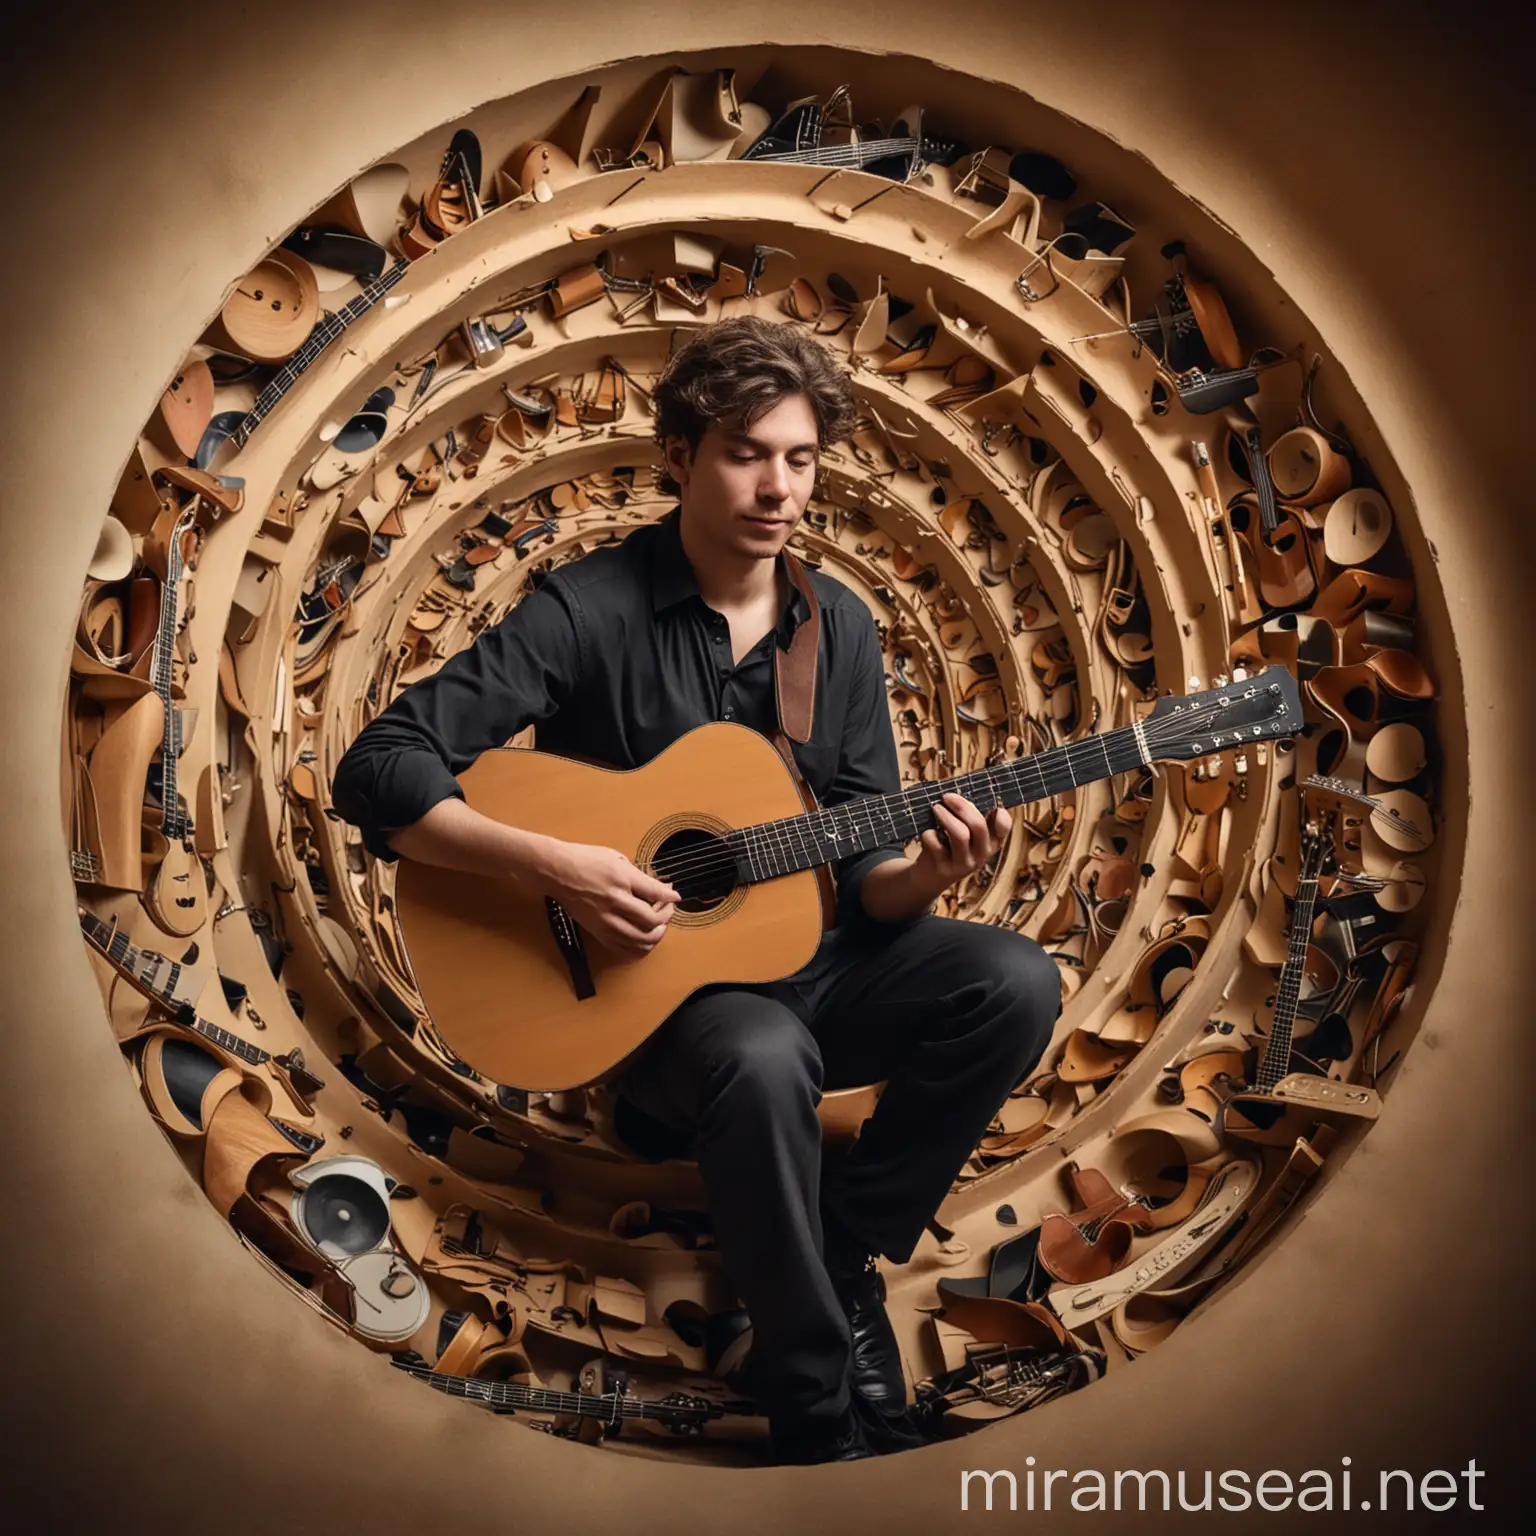 Spiral Shade Portrait of a Guitarist Amidst Scattered Instruments